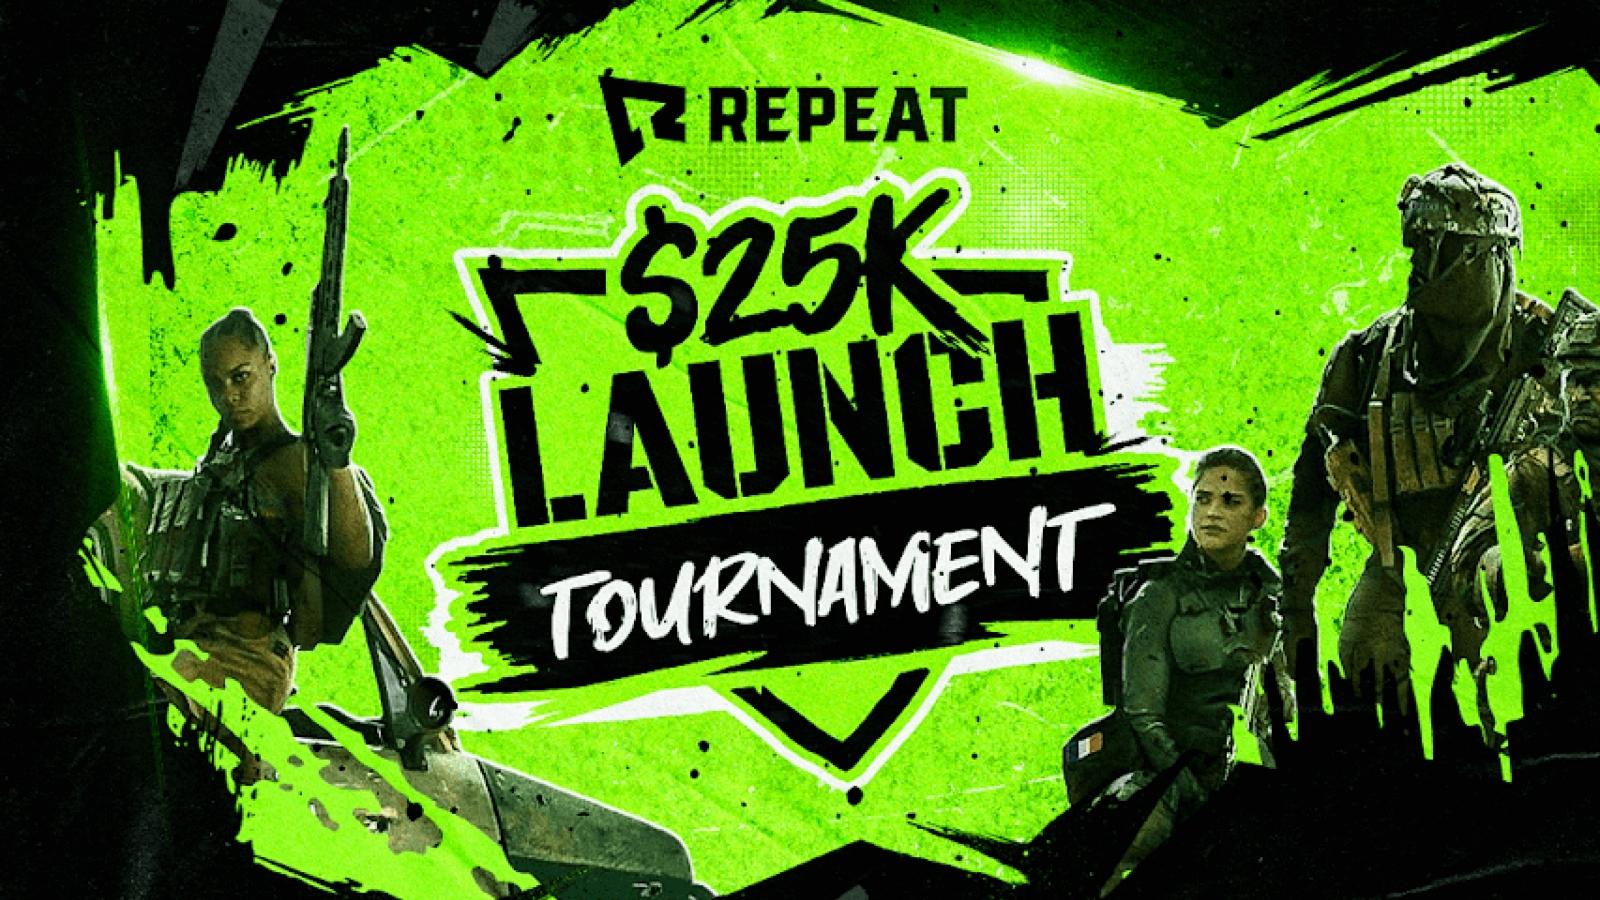 Repeat $25k Warzone launch tournament event poster